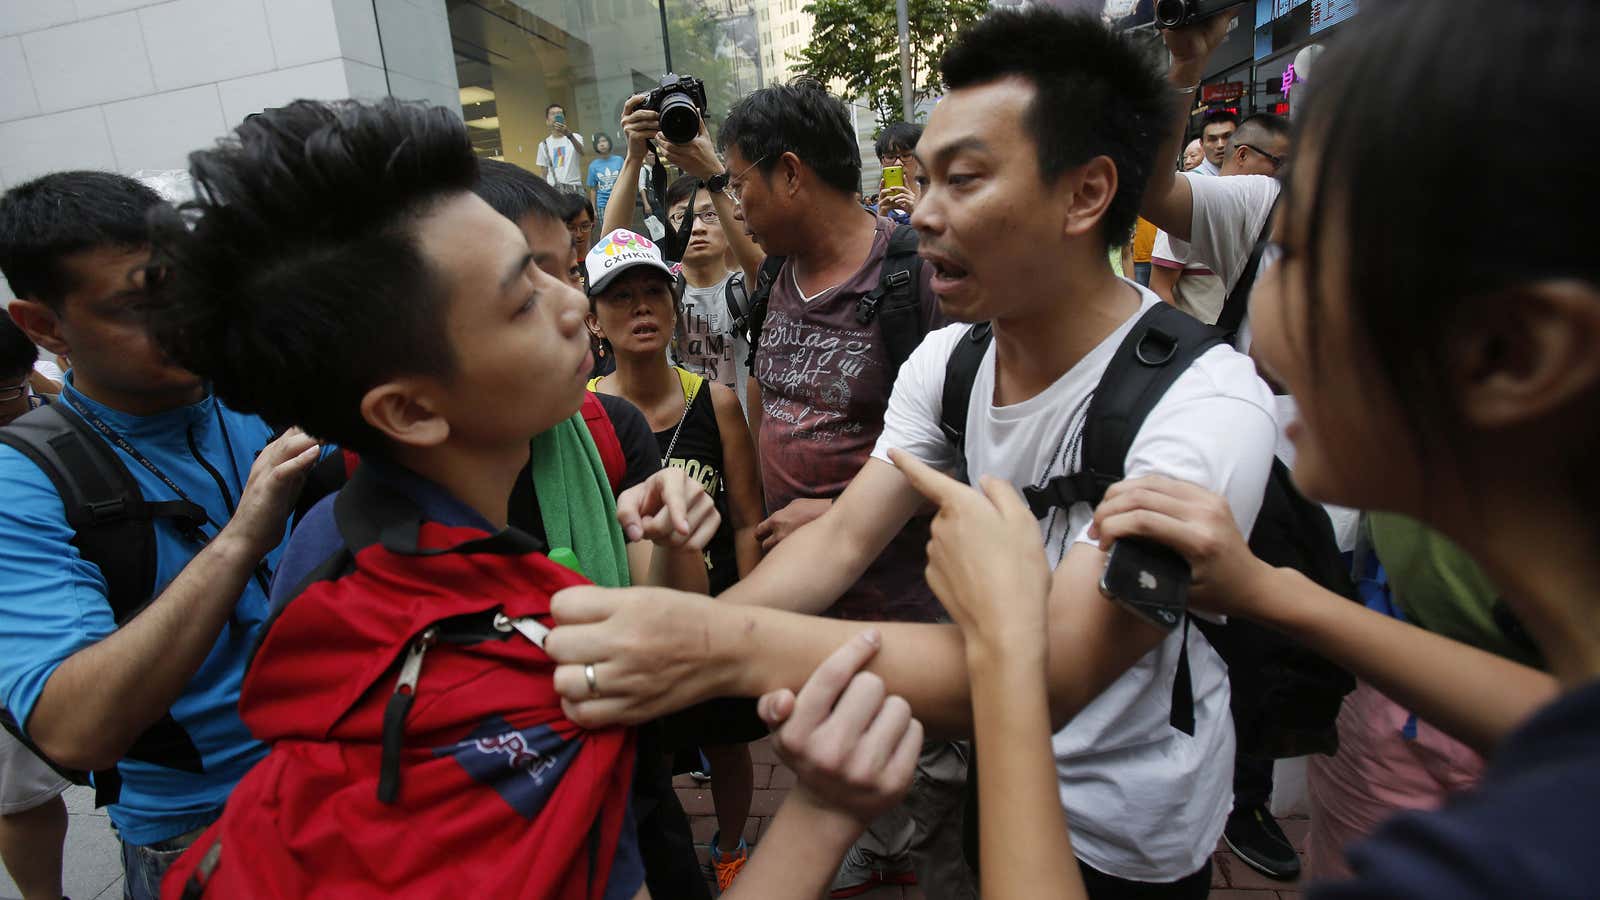 A pro-democracy student protester gets pressed by angry counter-demonstrators.